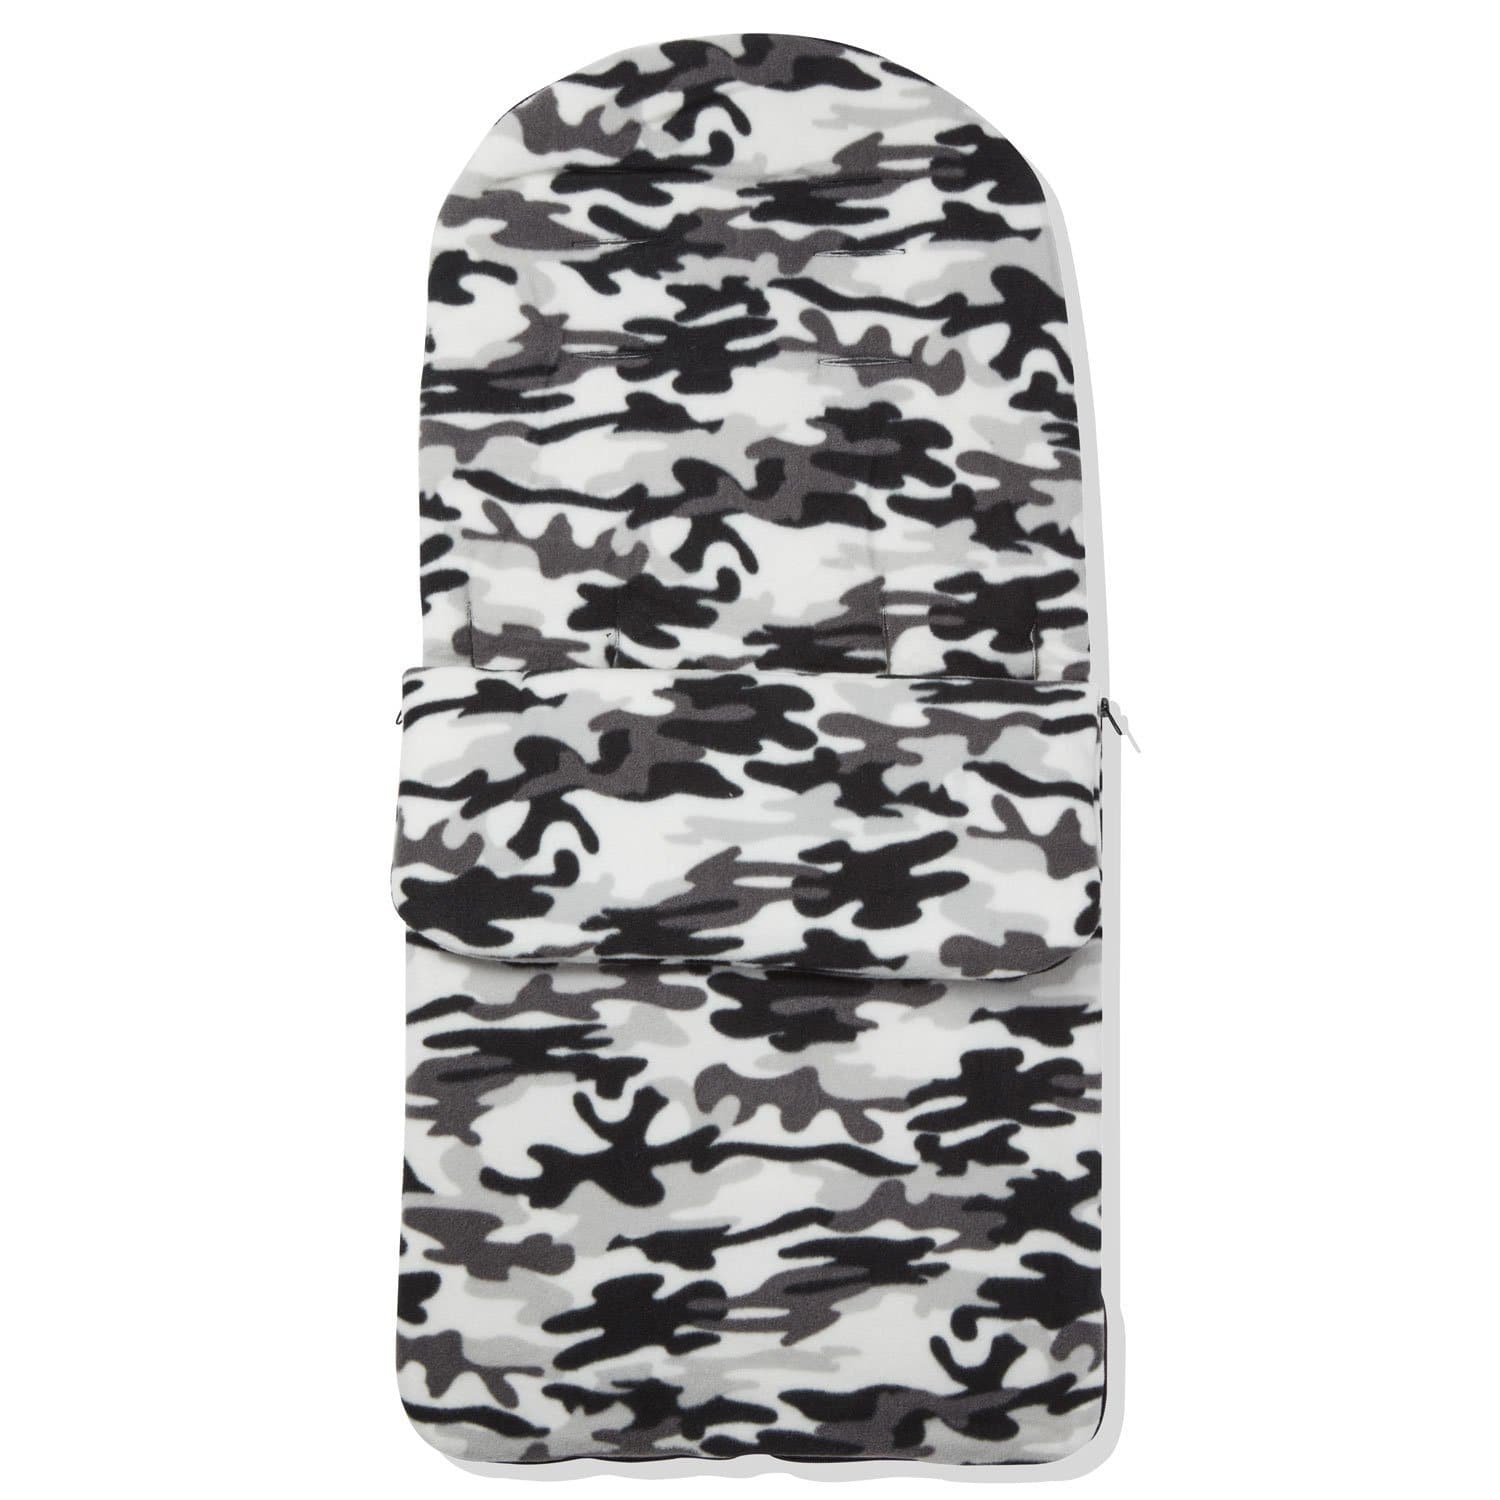 Fleece Footmuff / Cosy Toes Compatible with Kiddicare - Grey Camouflage / Fits All Models | For Your Little One